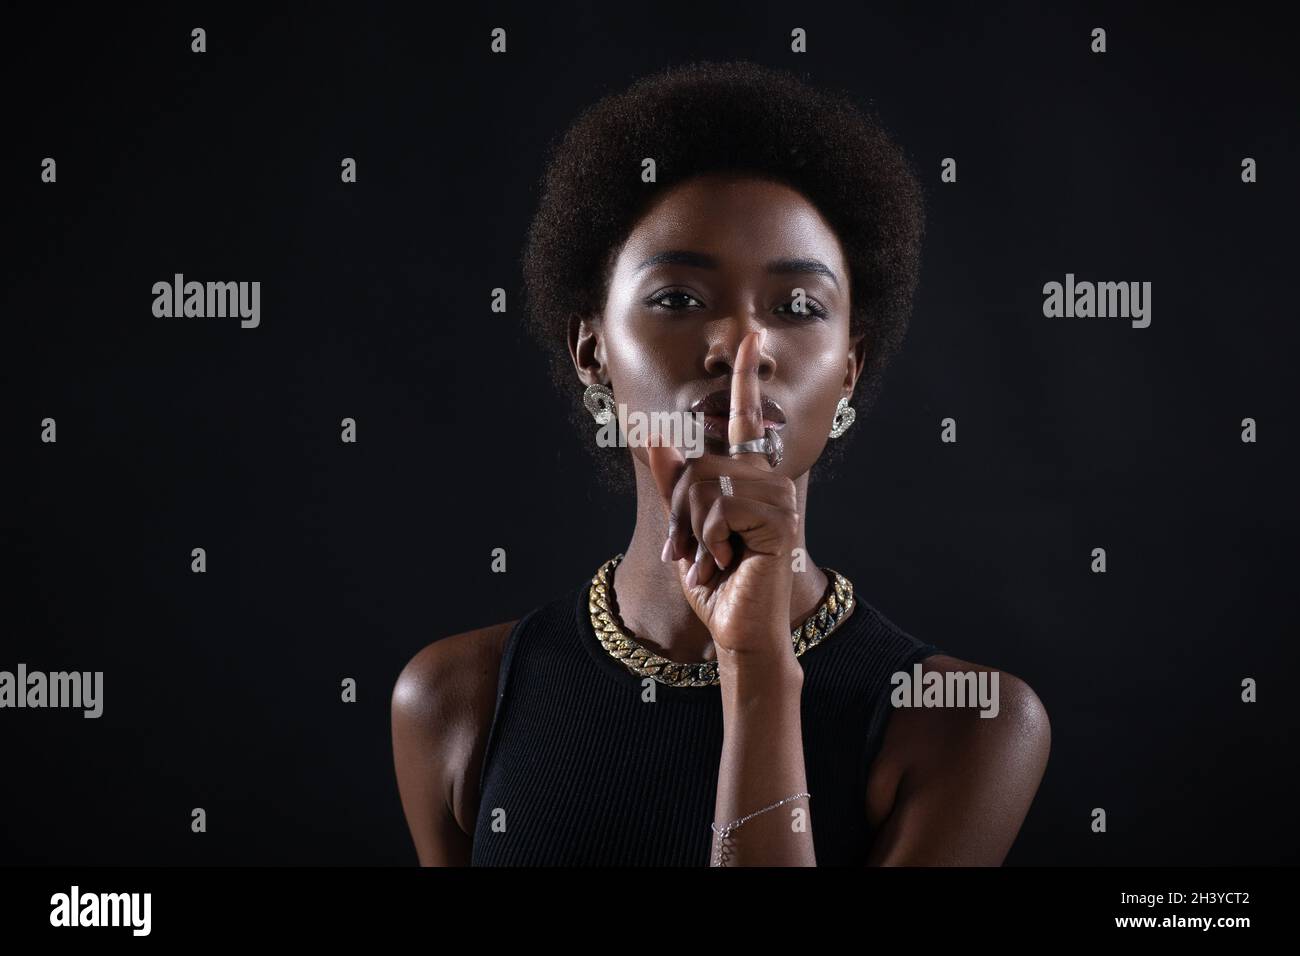 Closeup of beautiful young dark-skinned woman with finger on her lips showing shhh silence gesture on black background. Stock Photo